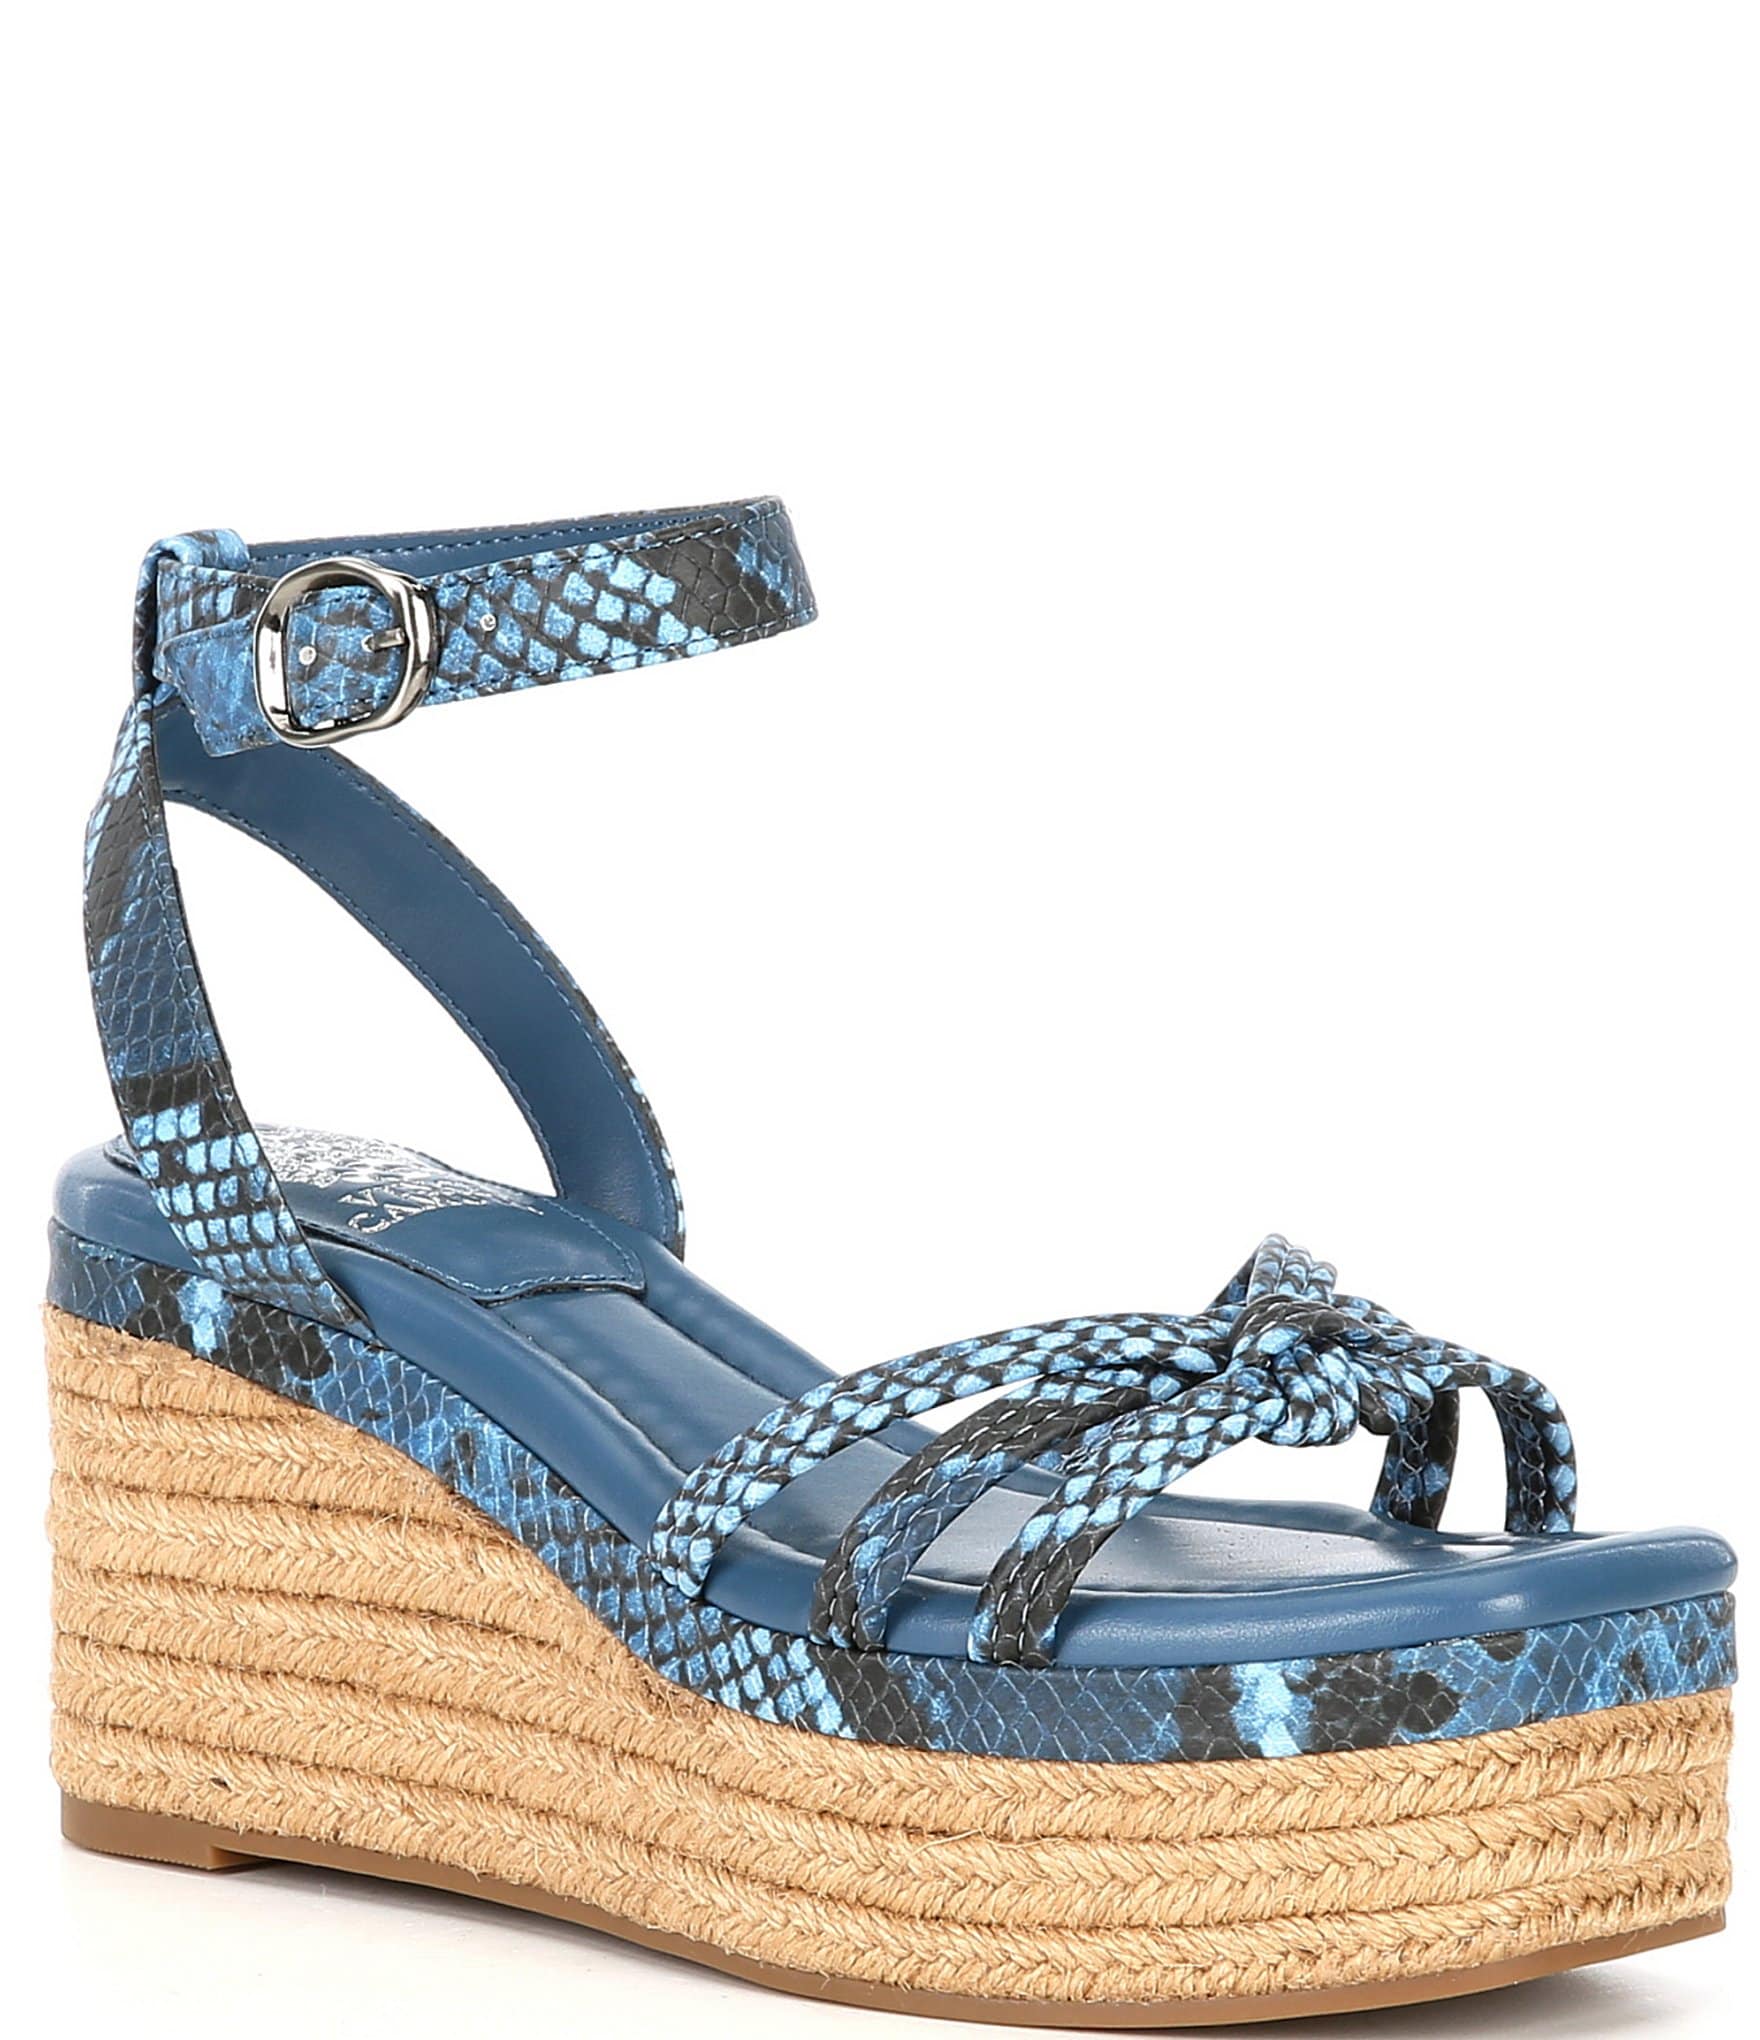 Vince Camuto Fancey Leather Knotted Woven Platform Sandals